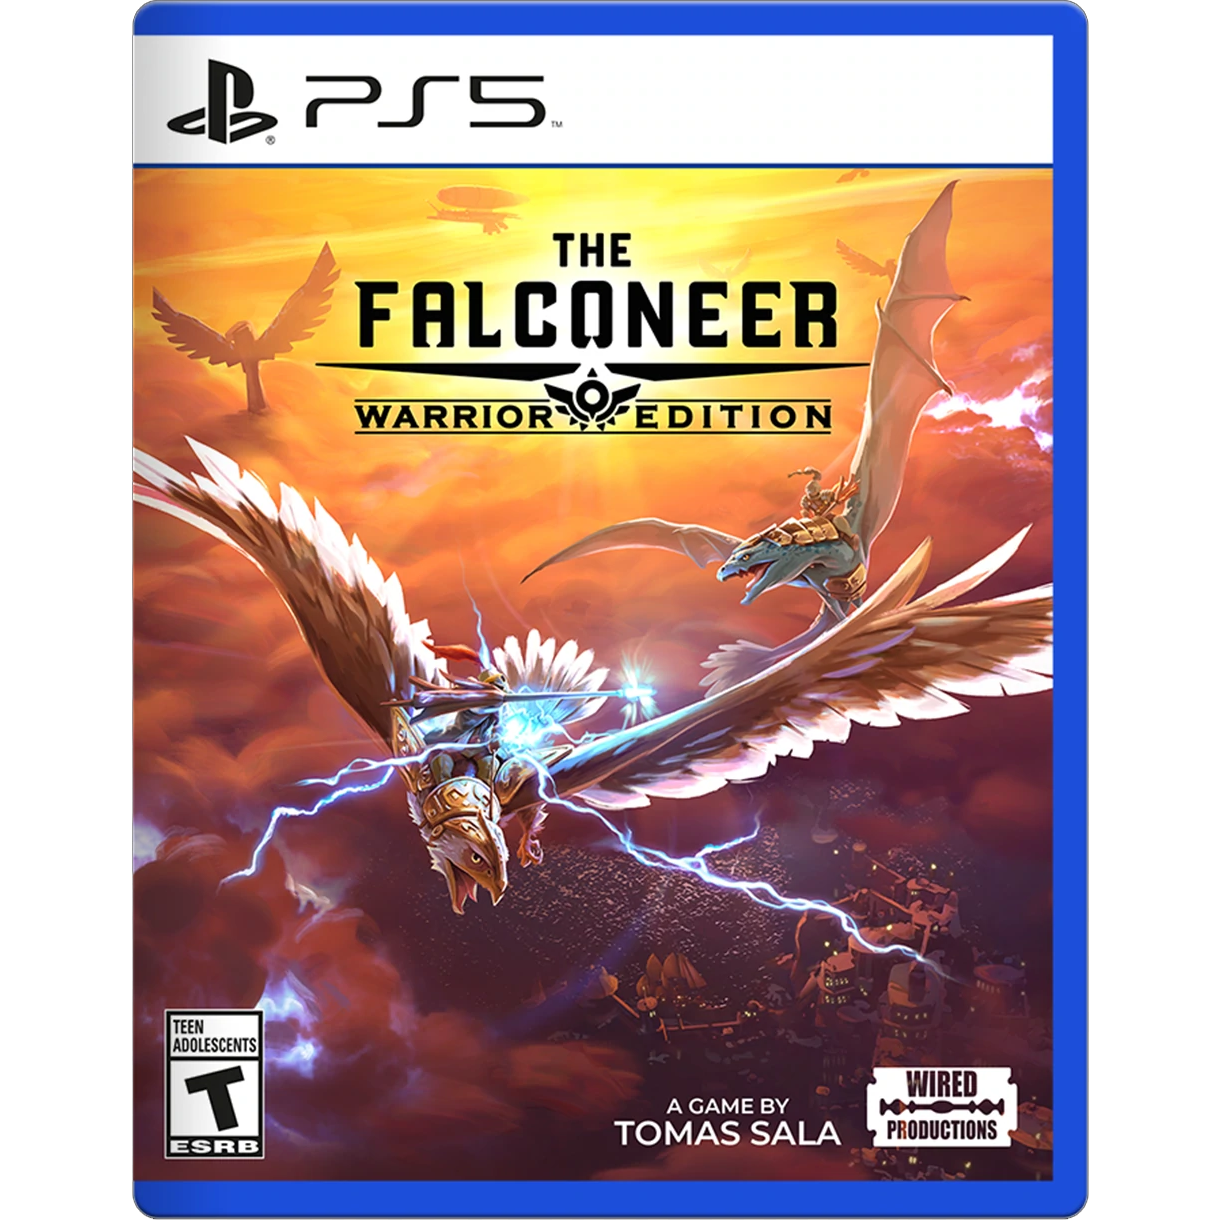 PS5 - The Falconeer Warrior Edition